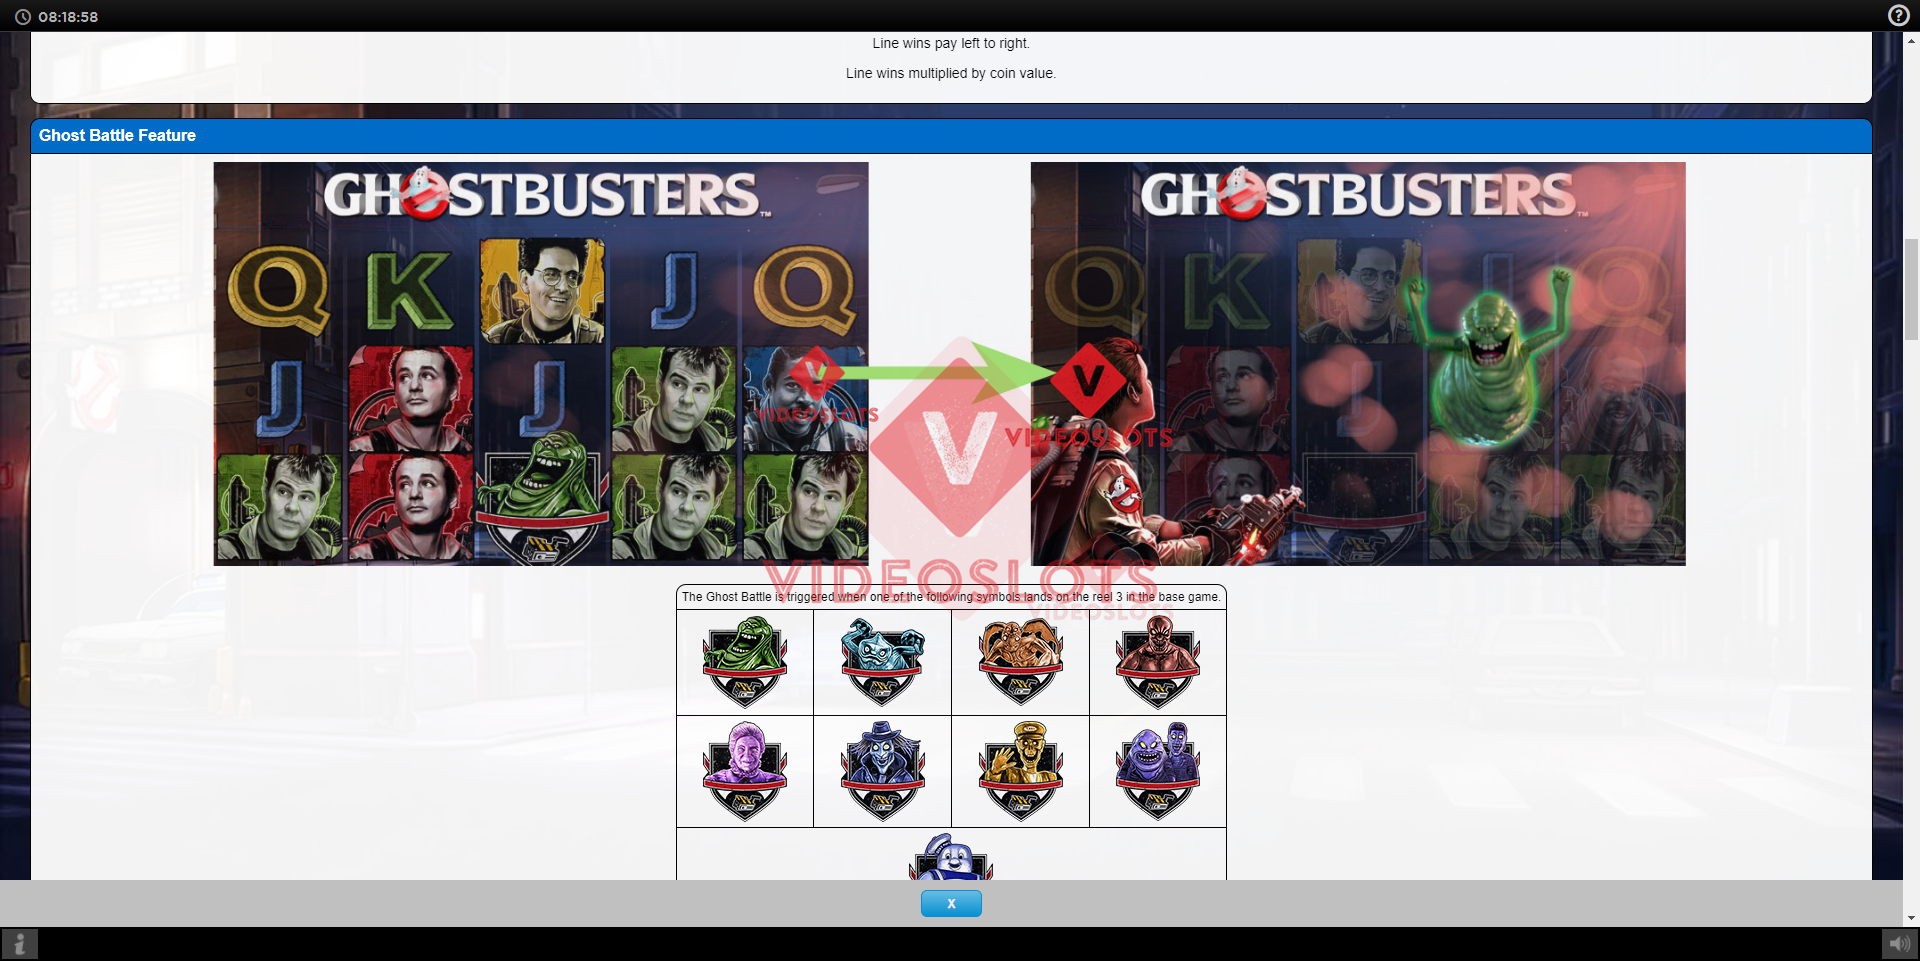 Pay Table for Ghostbusters Plus slot from IGT